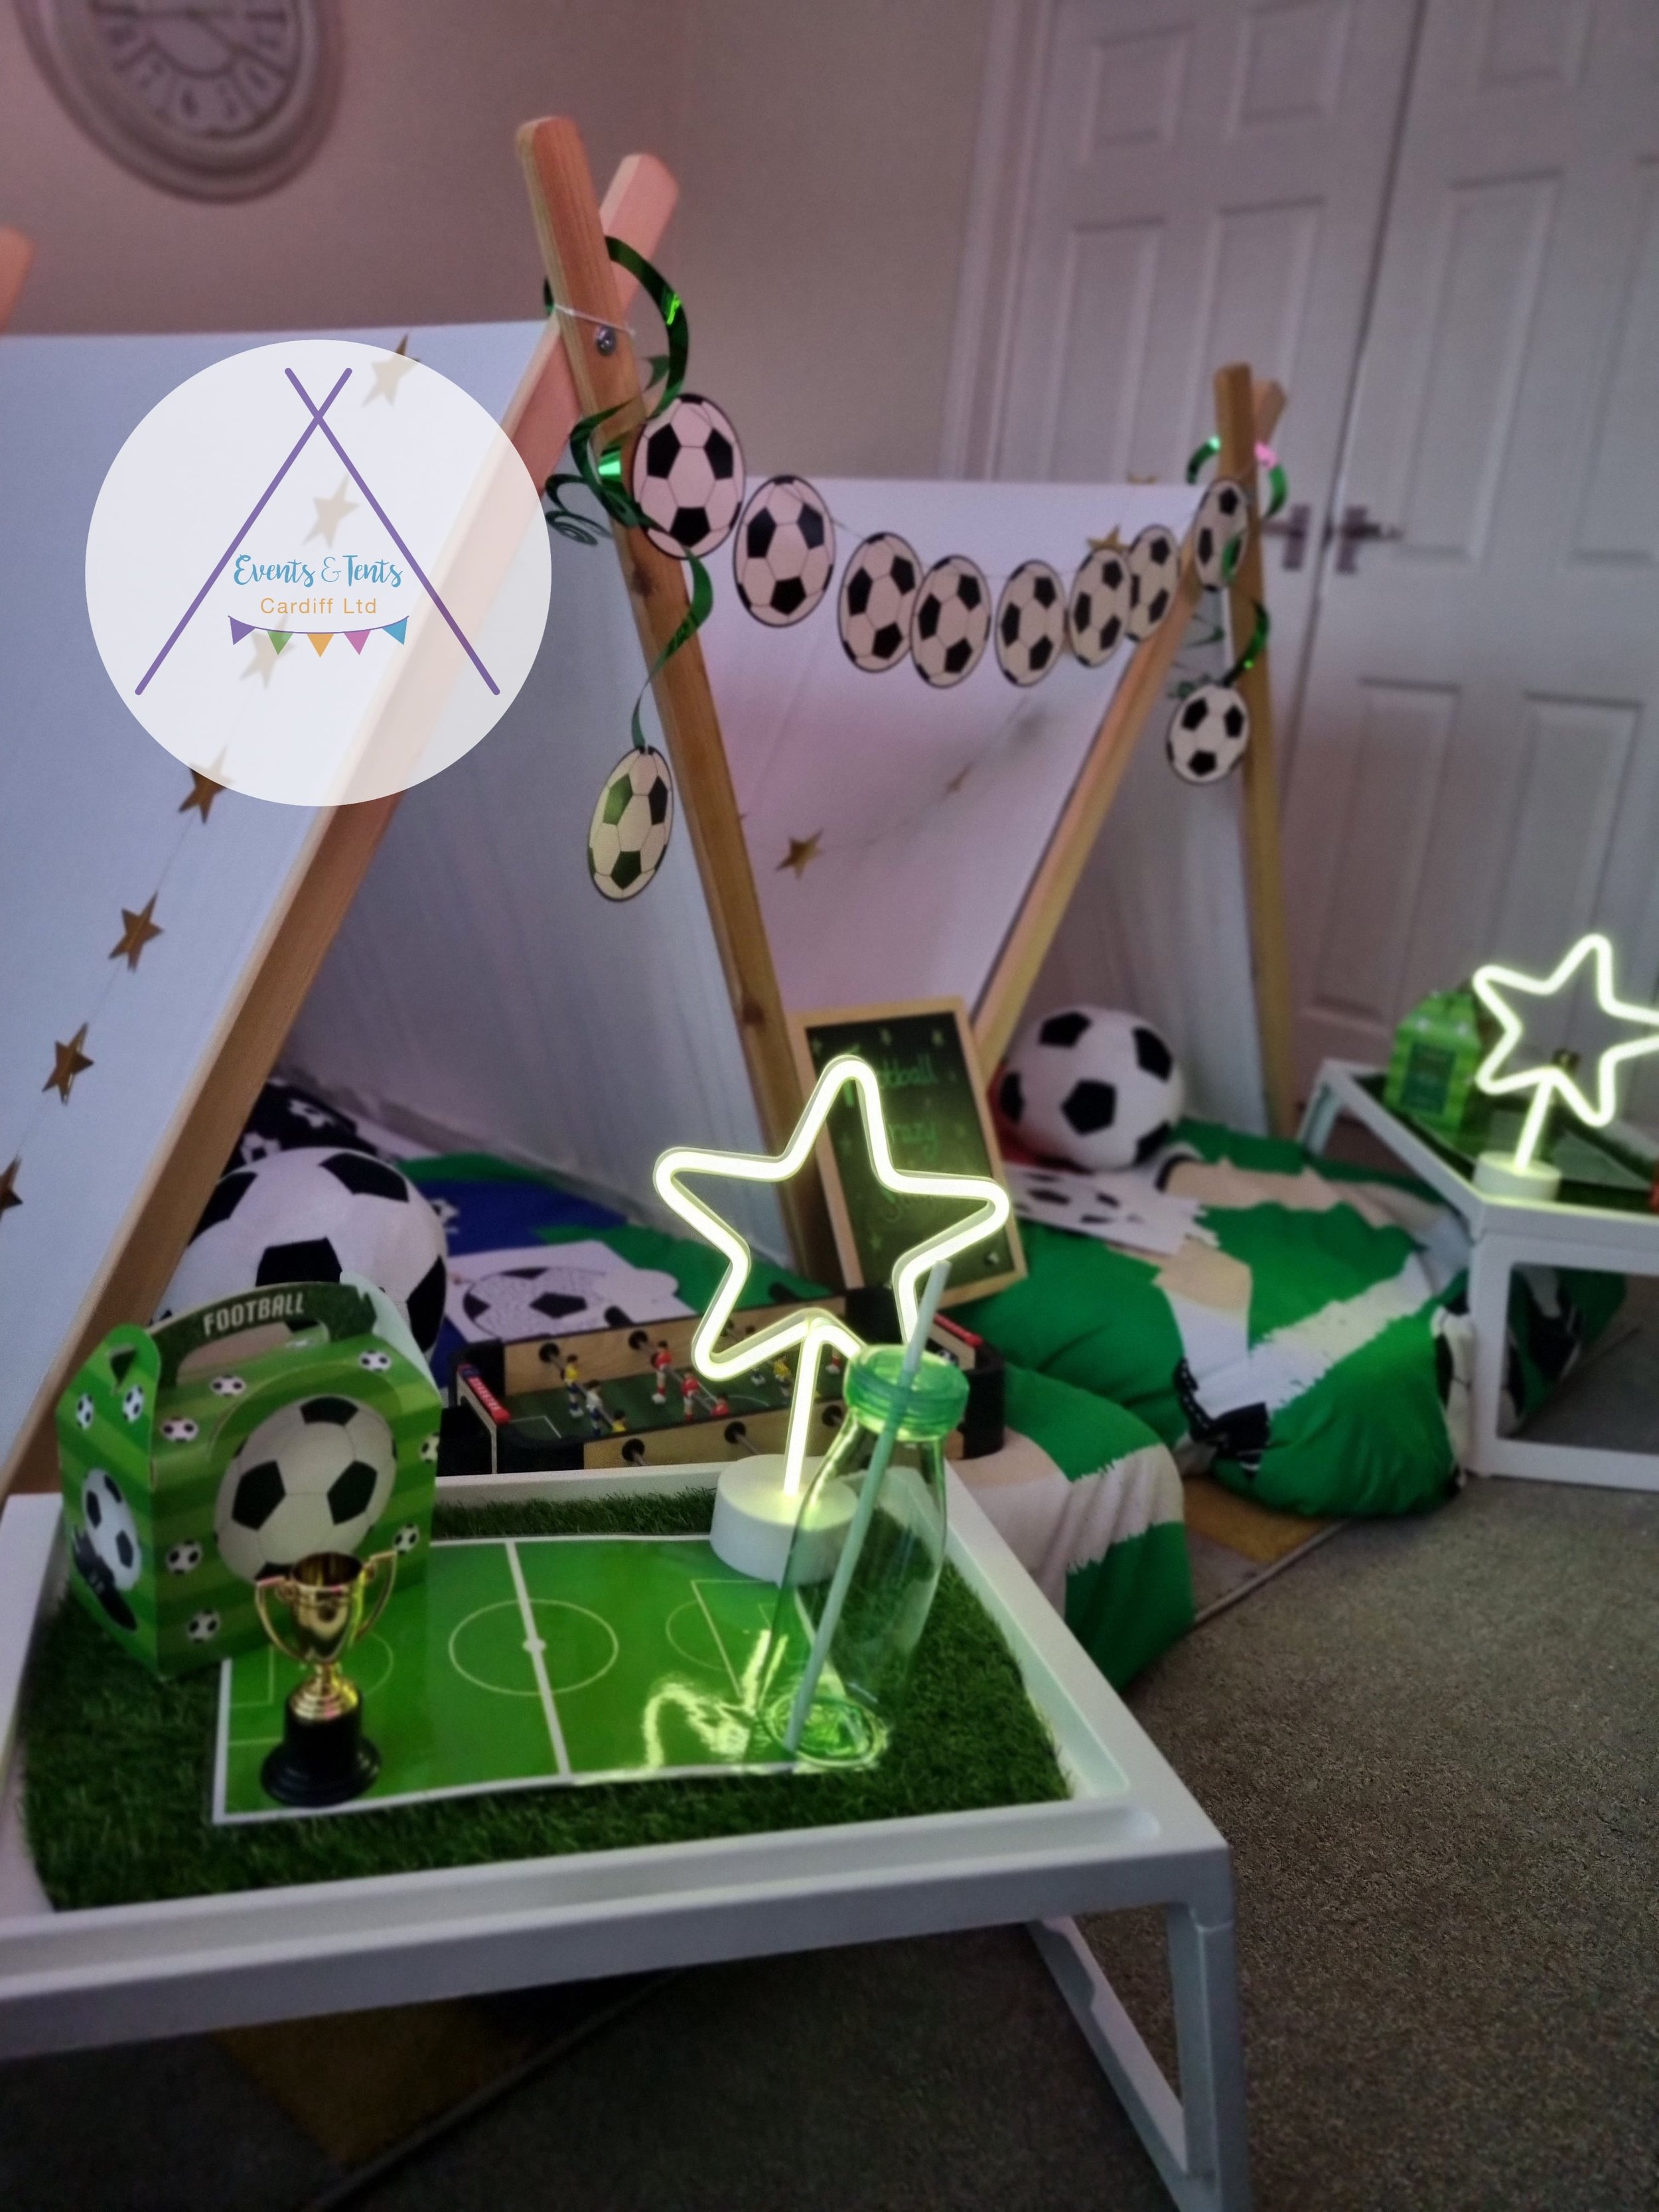 Events and Tents Cardiff Sleepovers - Sleepover party tents in South Wales